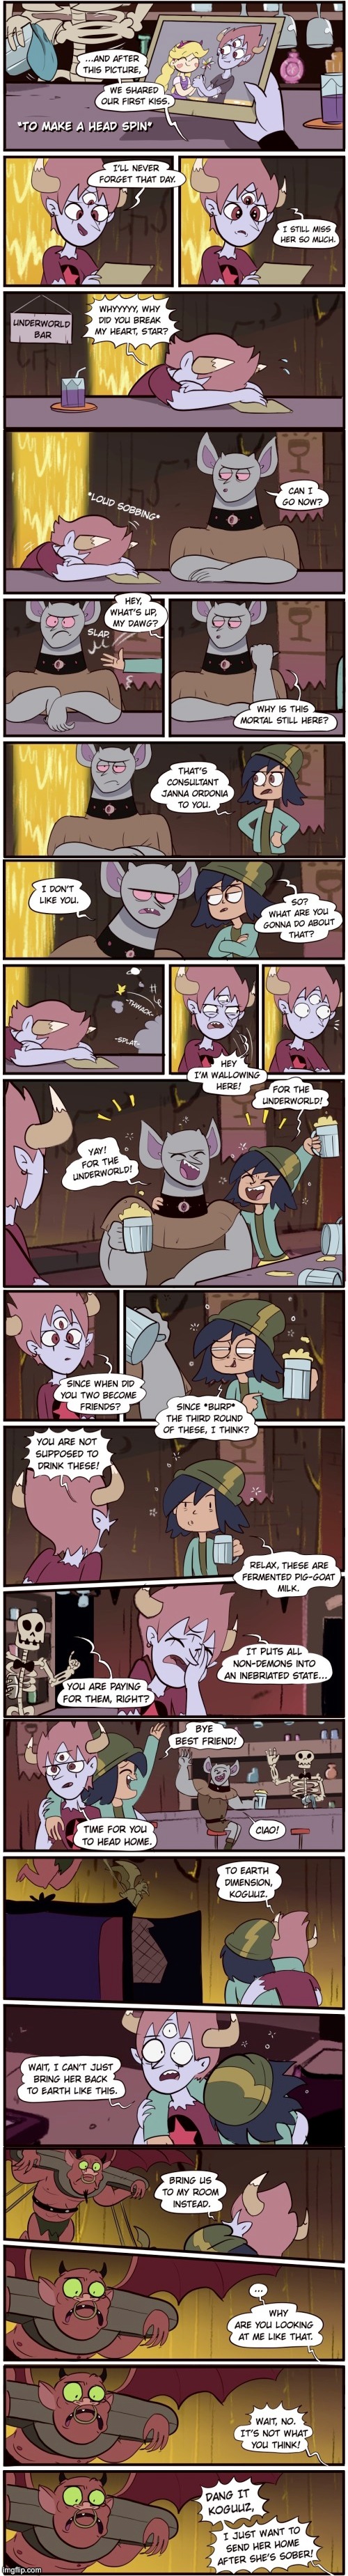 Tom vs Jannanigans: To Make A Head Spin (Part 1) | image tagged in morningmark,svtfoe,comics,star vs the forces of evil,comics/cartoons,memes | made w/ Imgflip meme maker